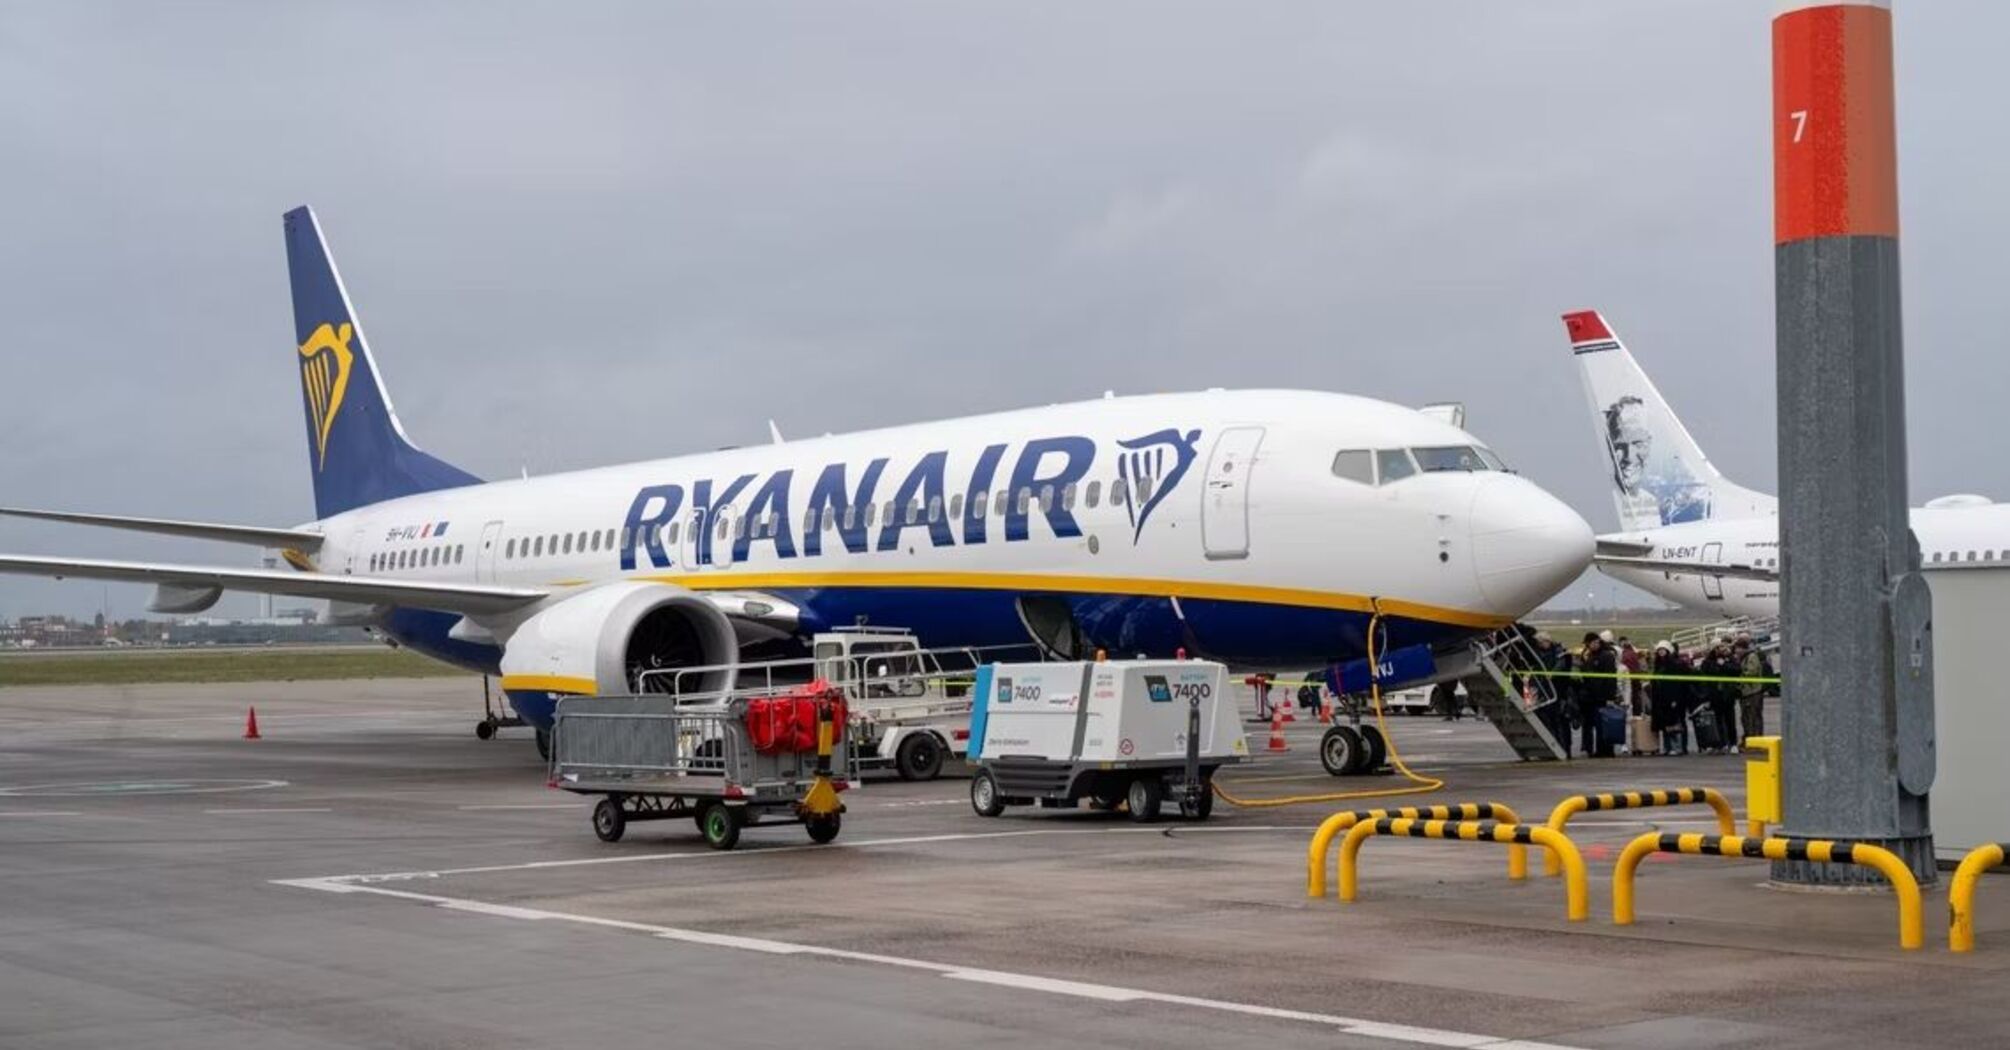 Online platforms removed Ryanair flights from their websites: Now bookings slowed by 2%